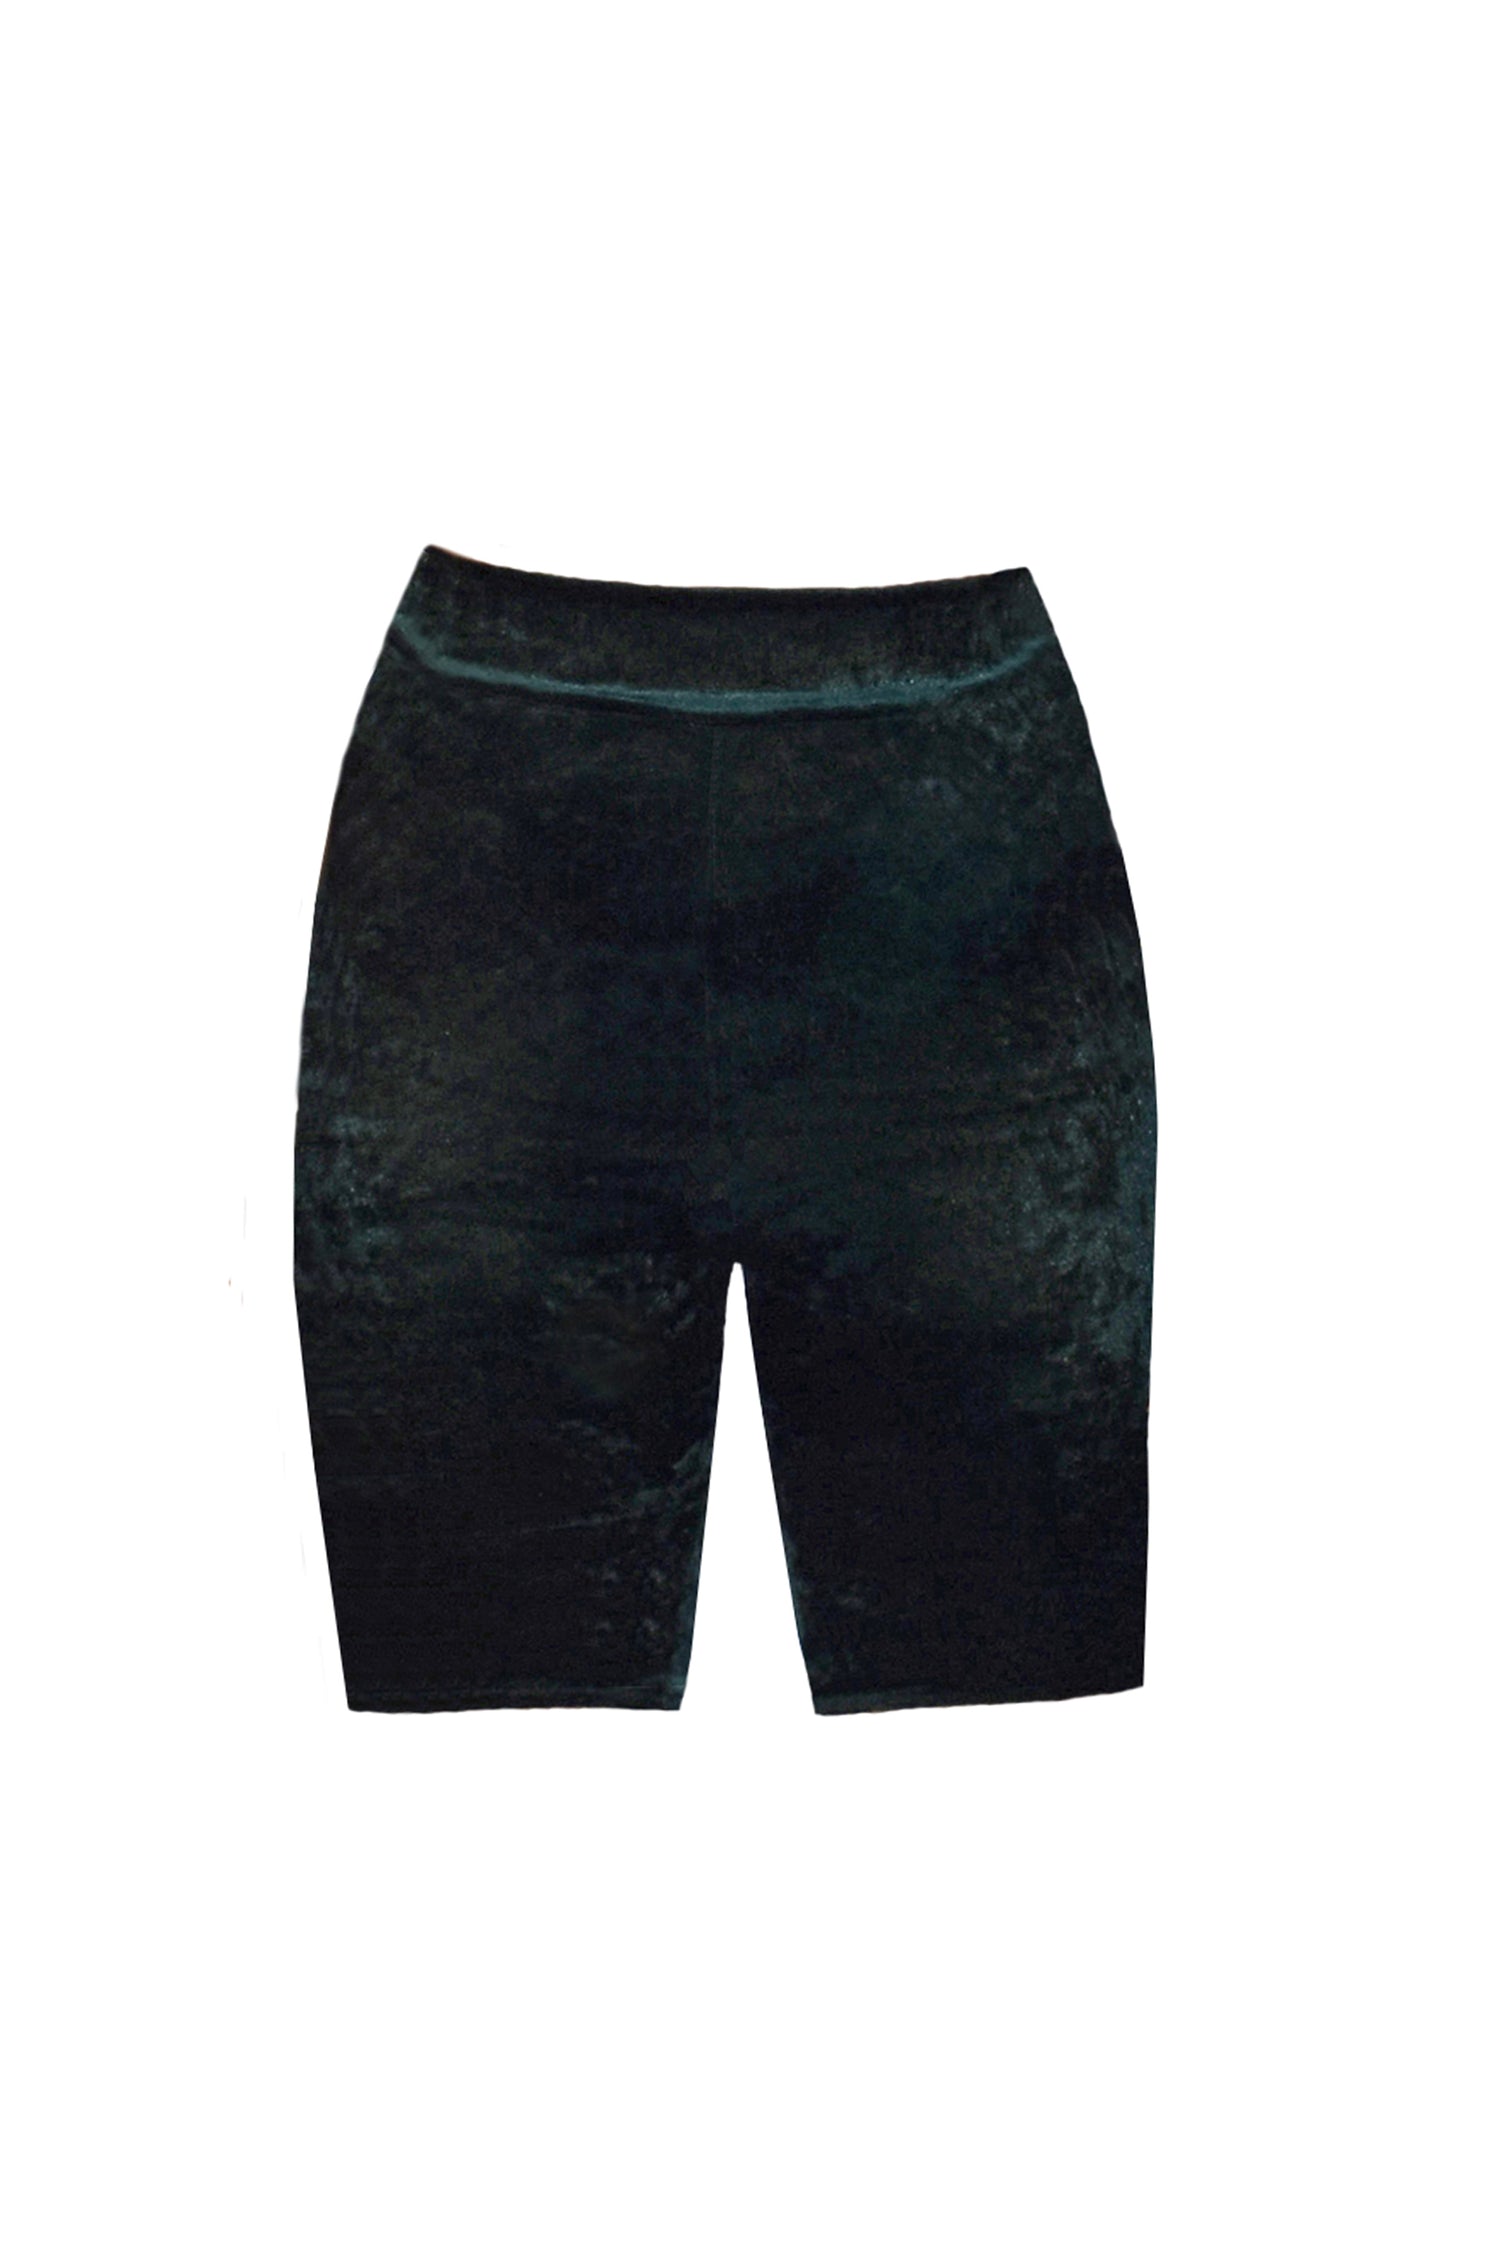 No Wallflower Project Riding Shorts in Forest Green Velvet